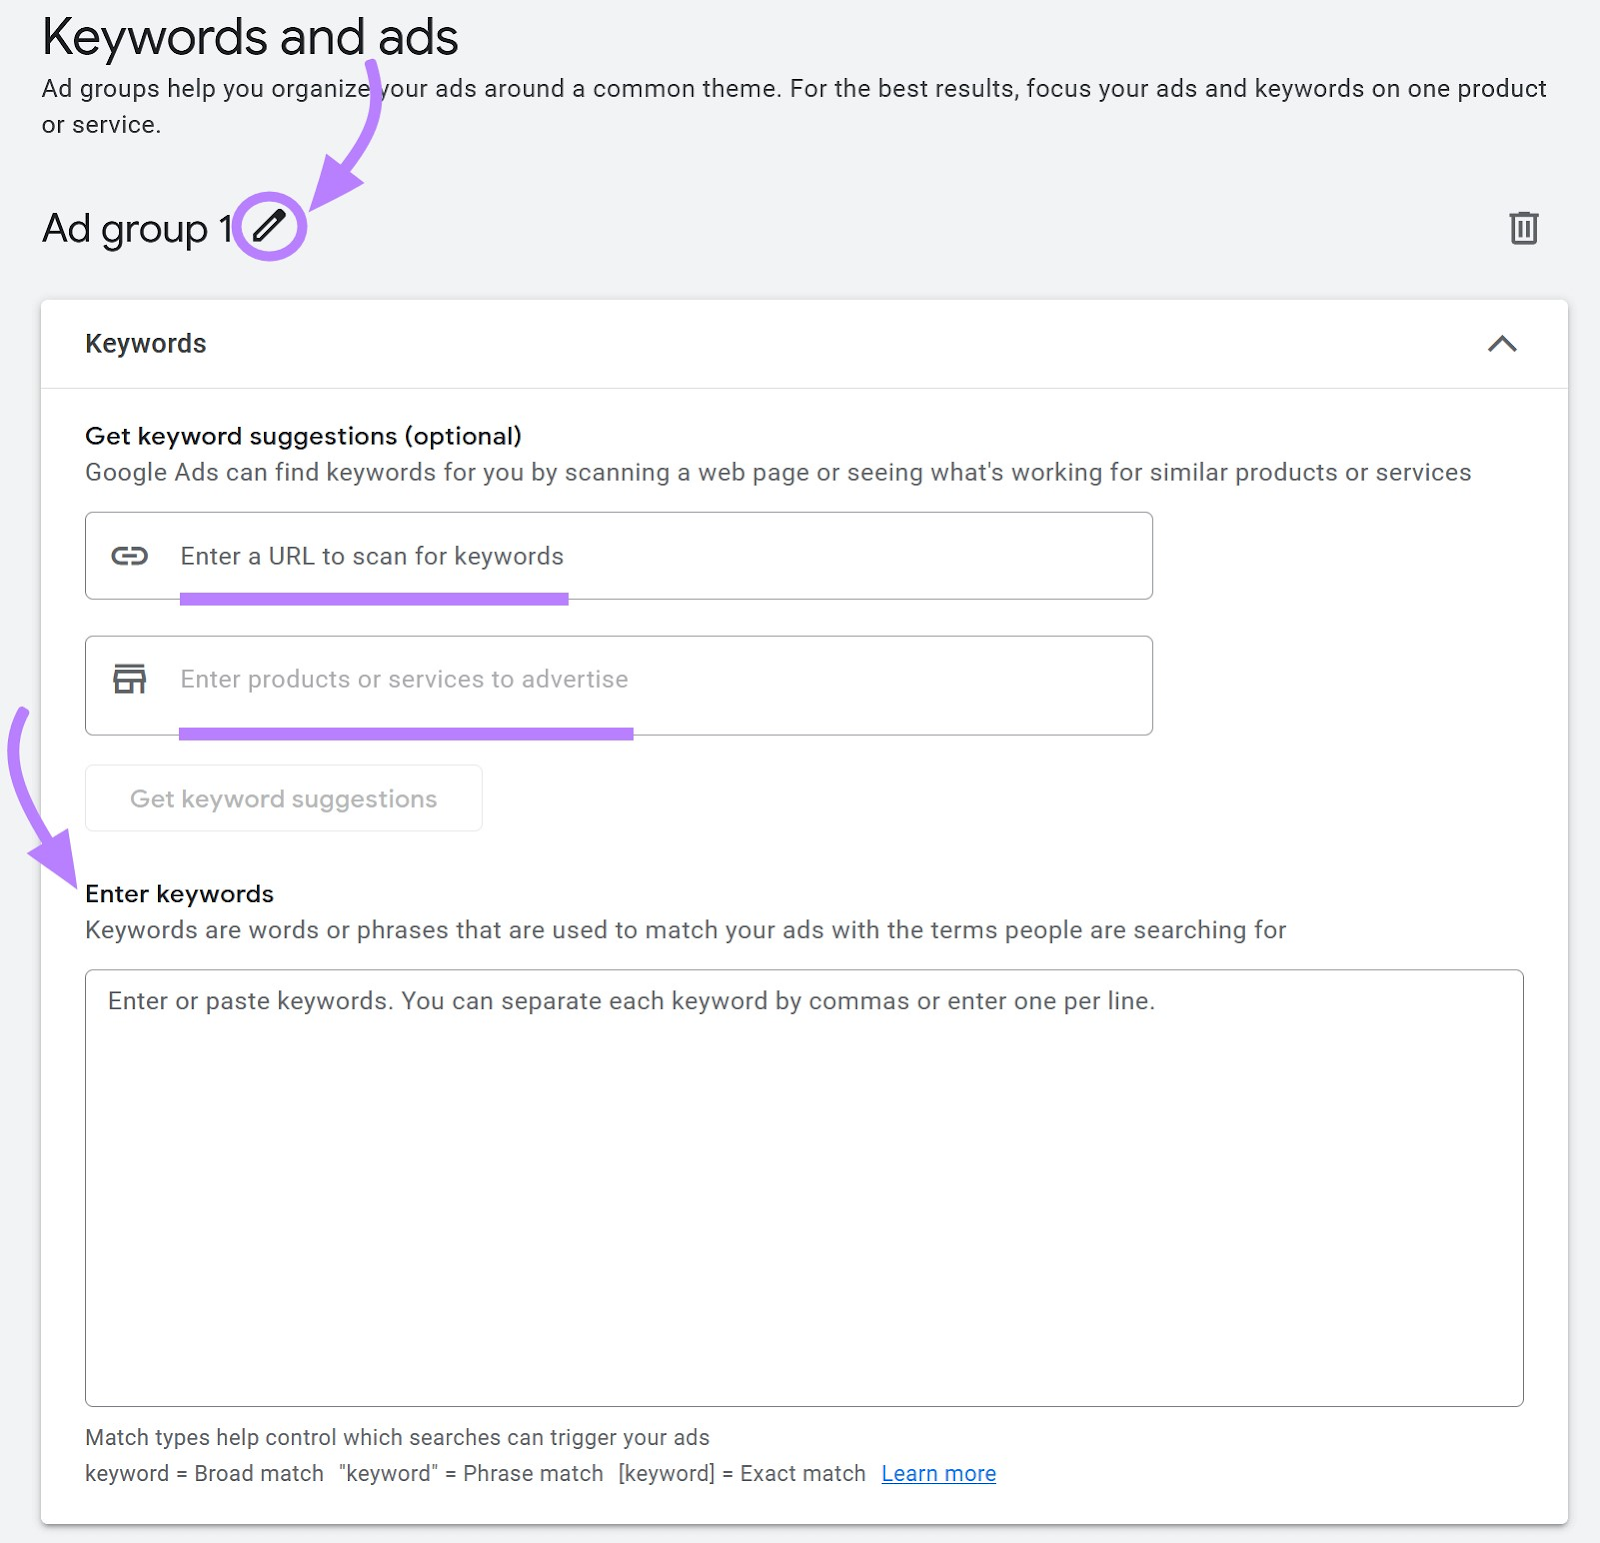 “Keywords and ads” section in Google Ads